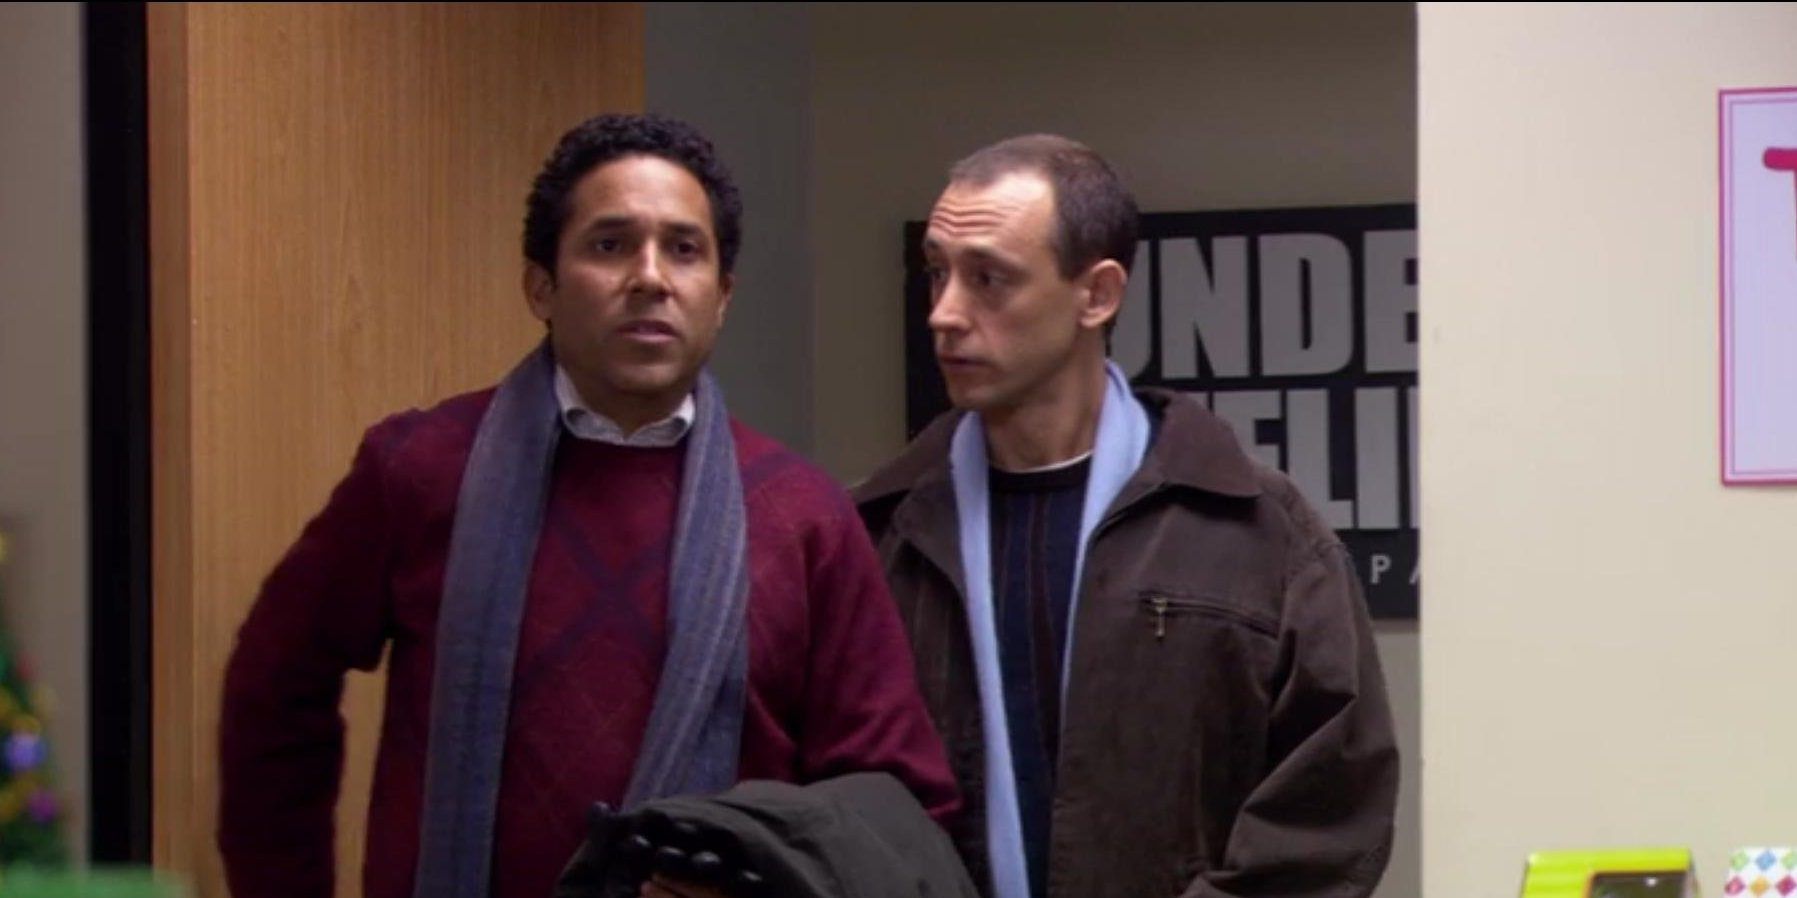 Oscar and Gil standing next to each other in The Office